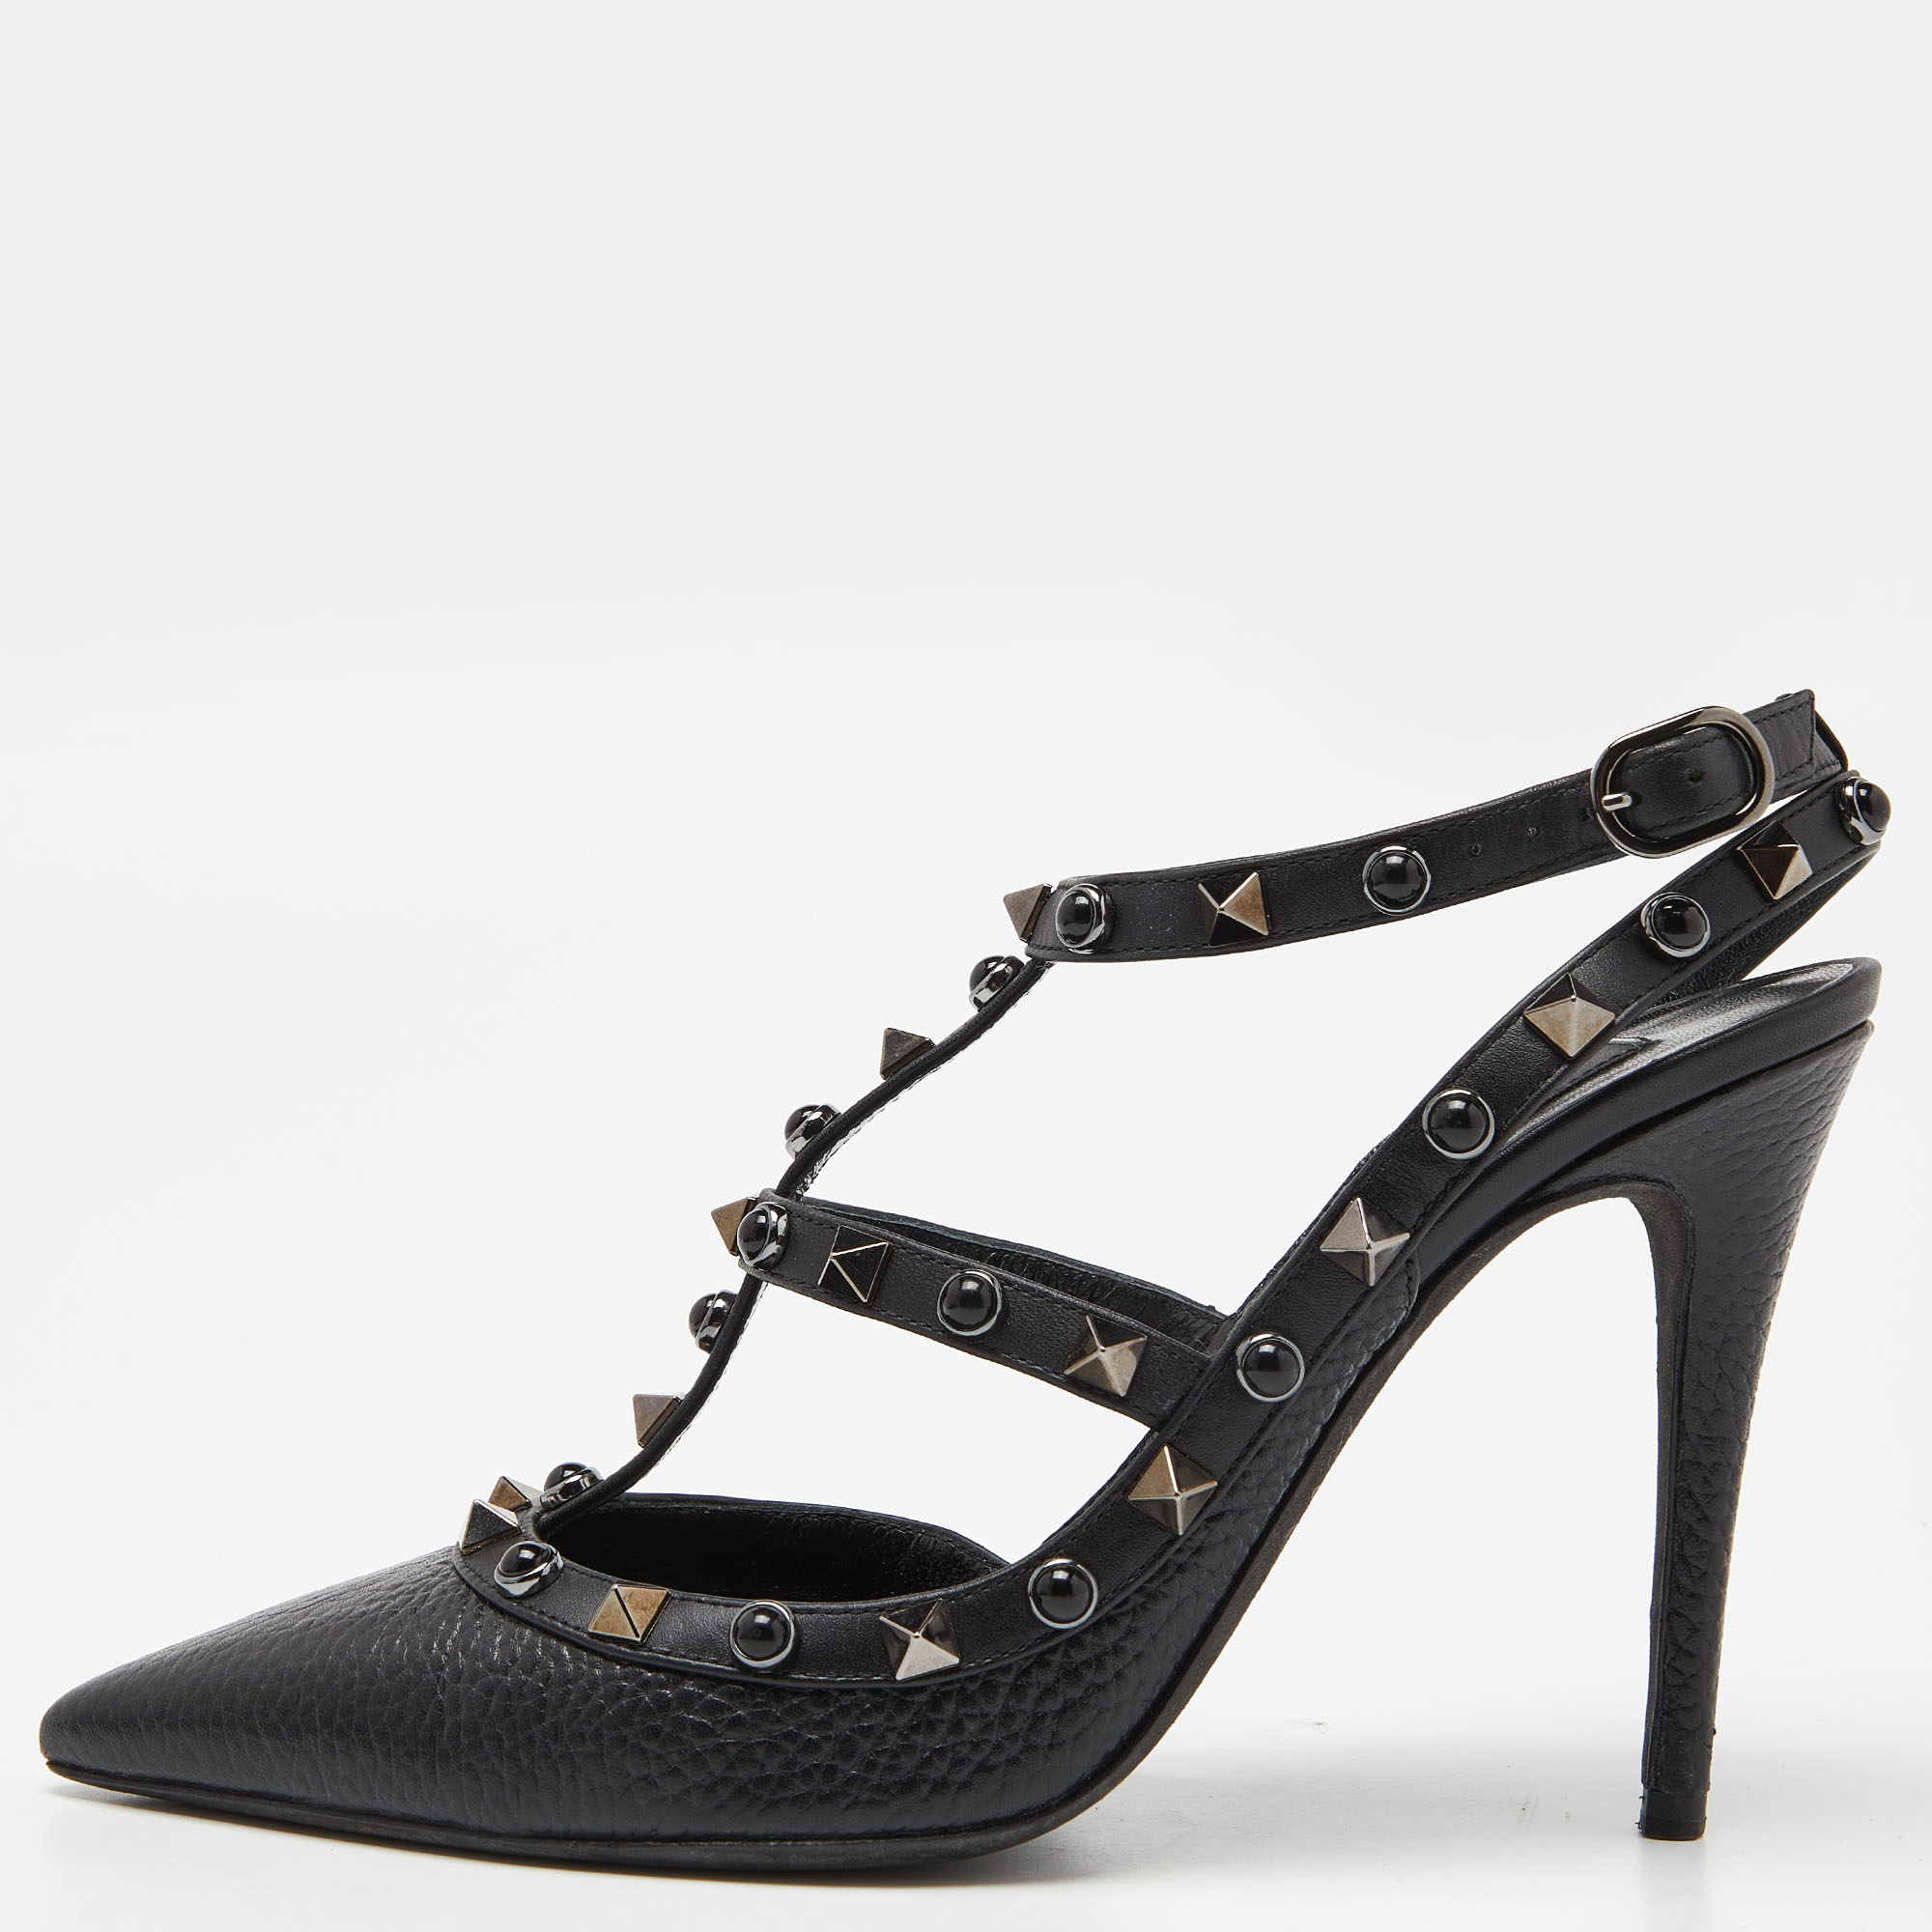 Valentino Black Leather Rockstud Strappy Pointed Toe Pumps Size 37.5